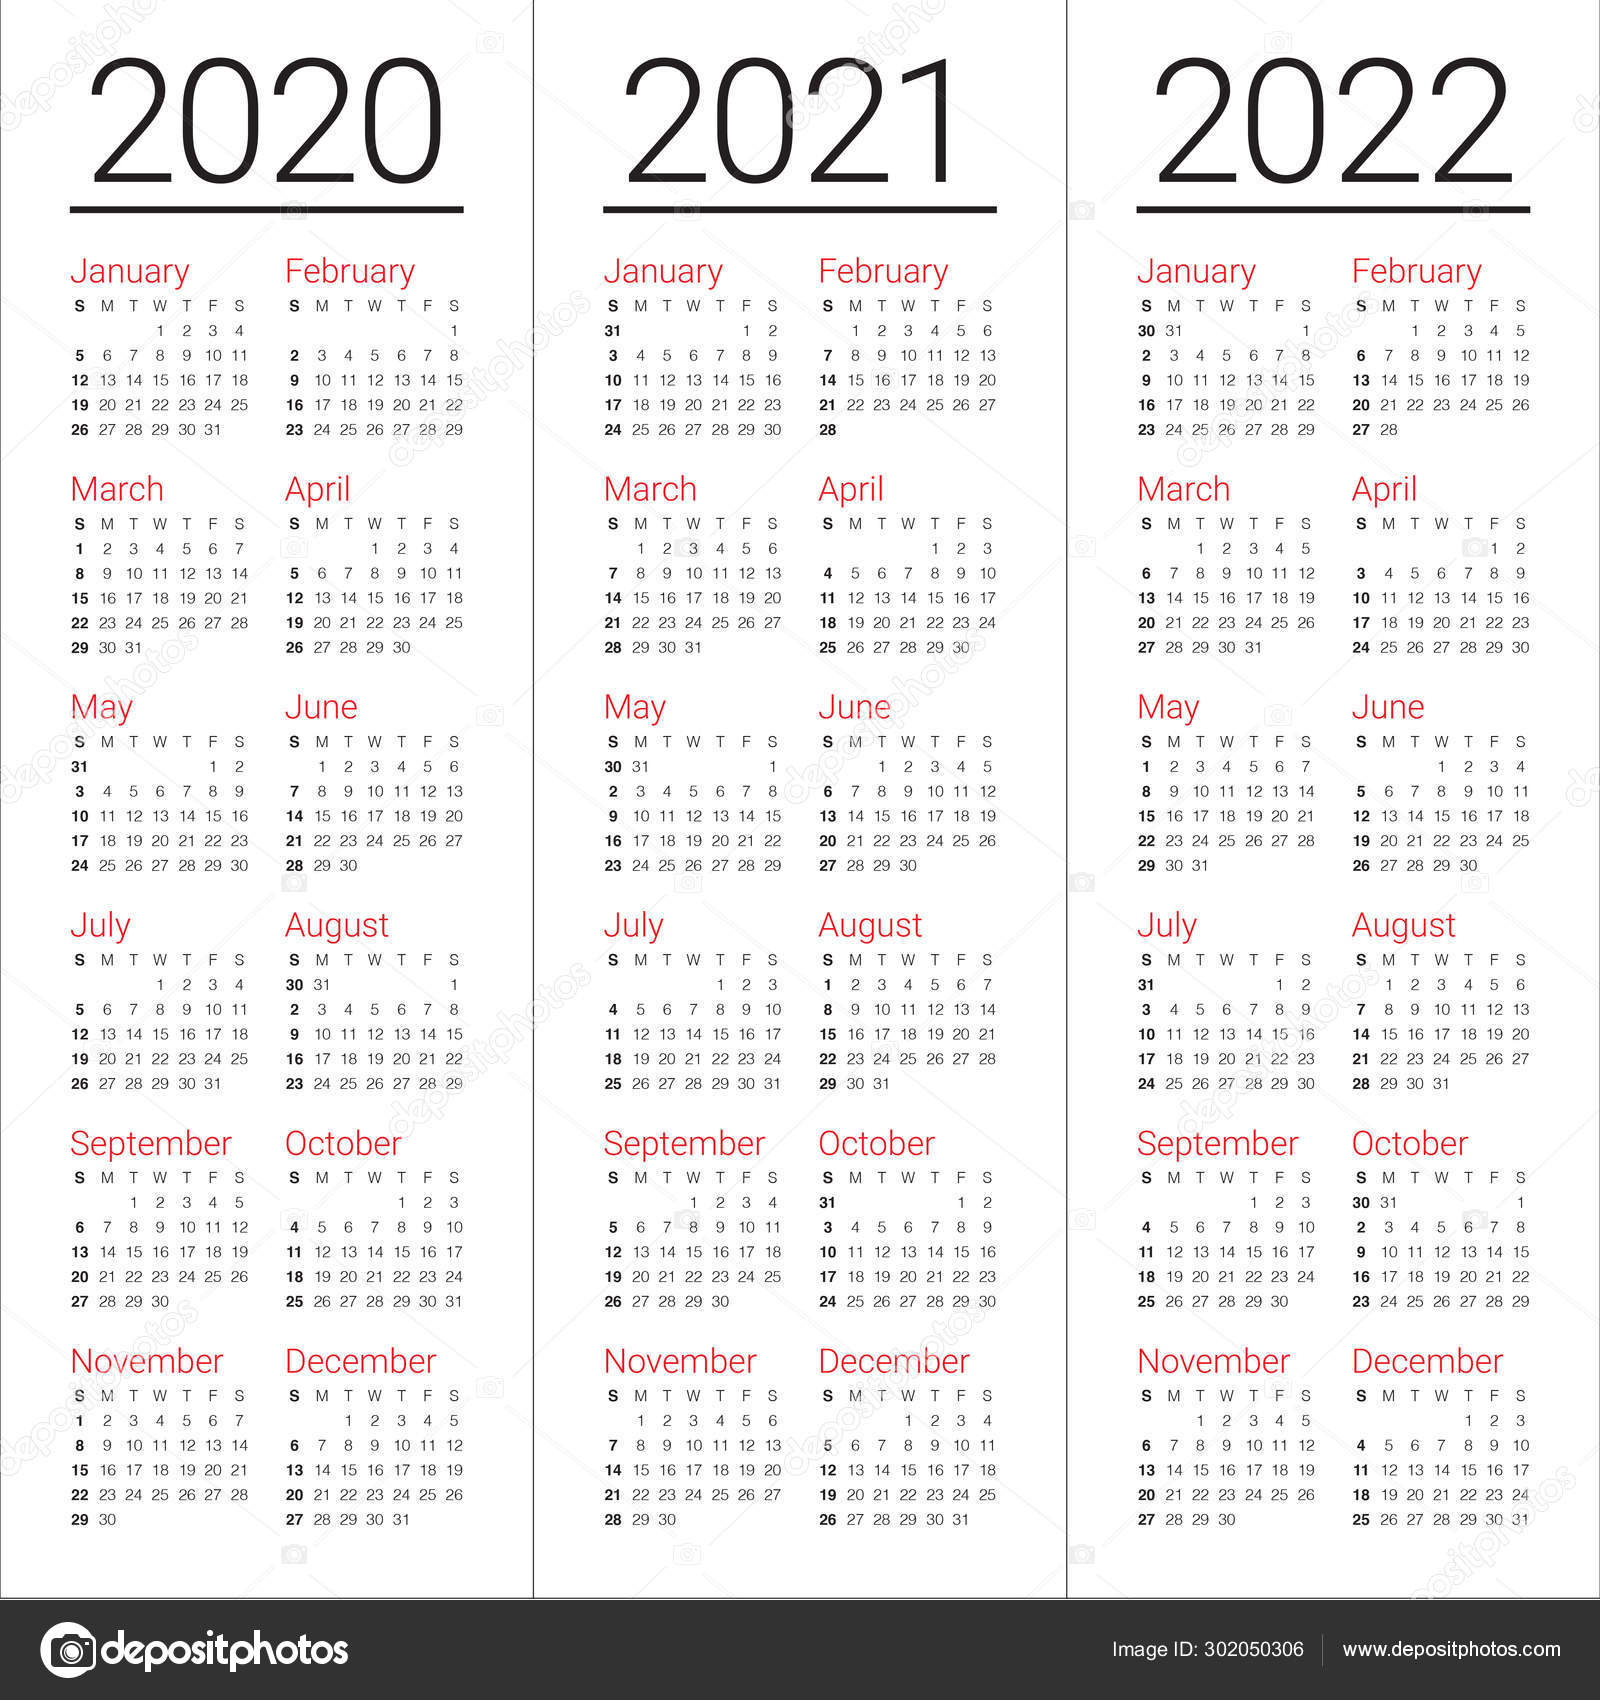 Year 2020 2021 2022 Calendar Vector Design Template Stock Vector Image By C Dolphfynlow 302050306